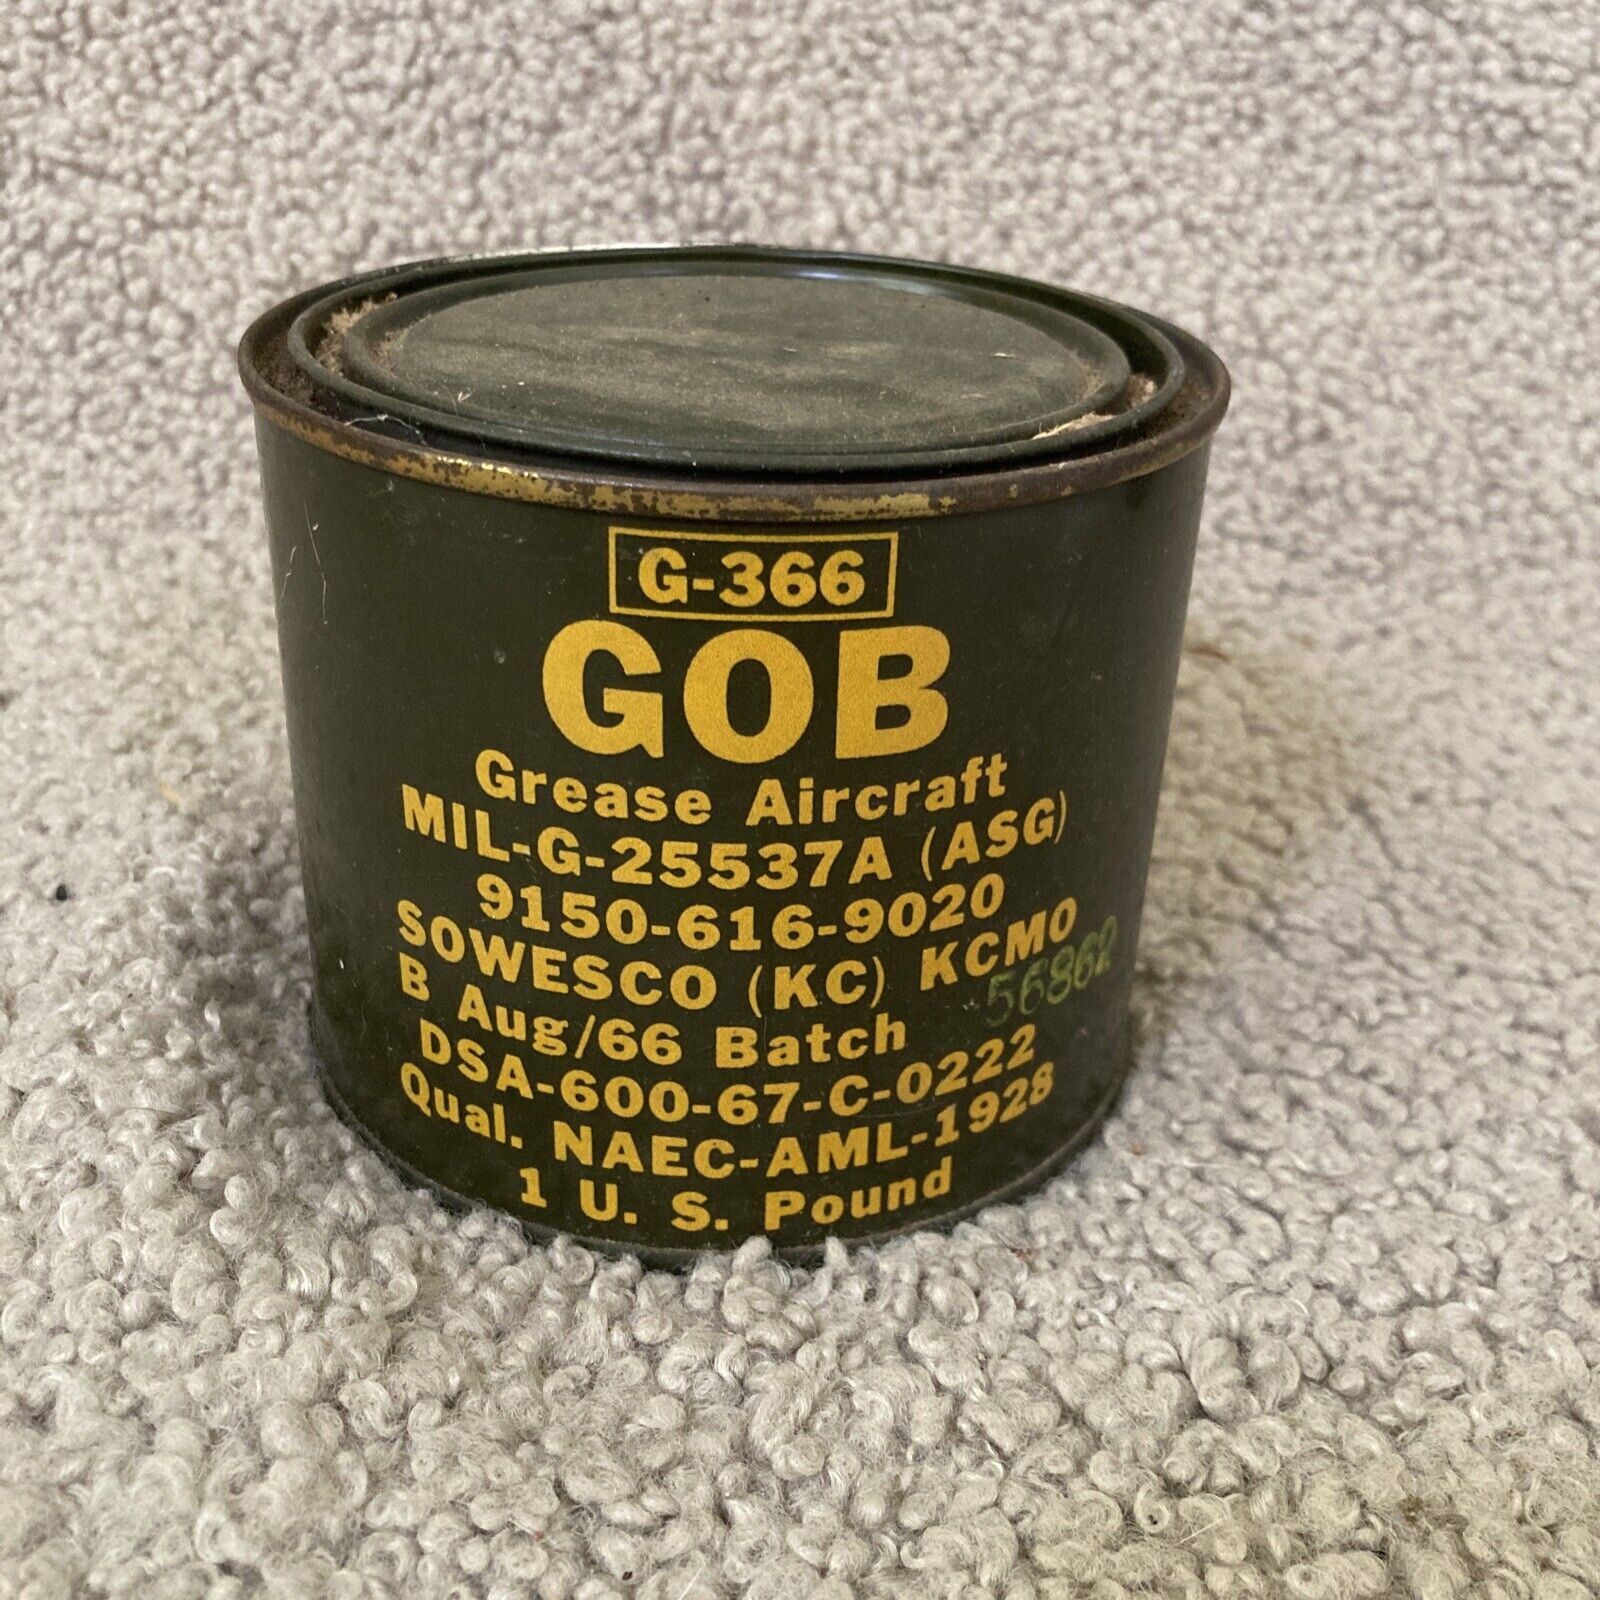 Vintage 1996 US Military G-366 GOB Aircraft Grease 1 Lb Container